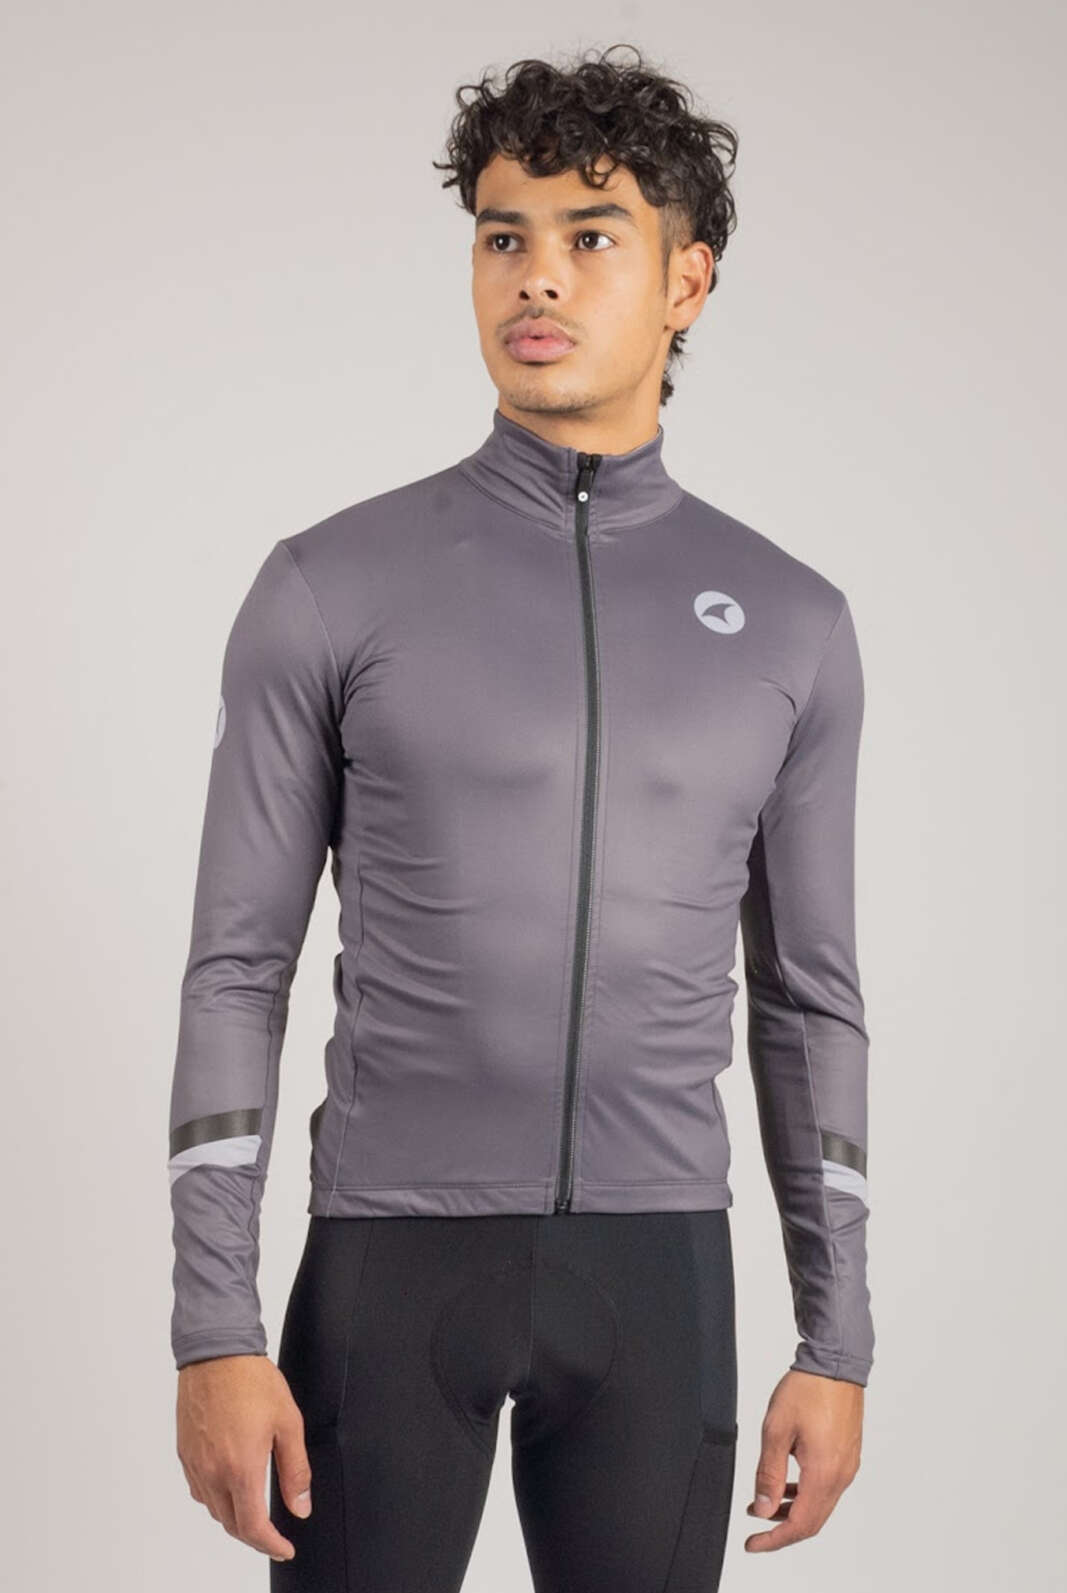 Men's Charcoal Thermal Cycling Jersey - Front View